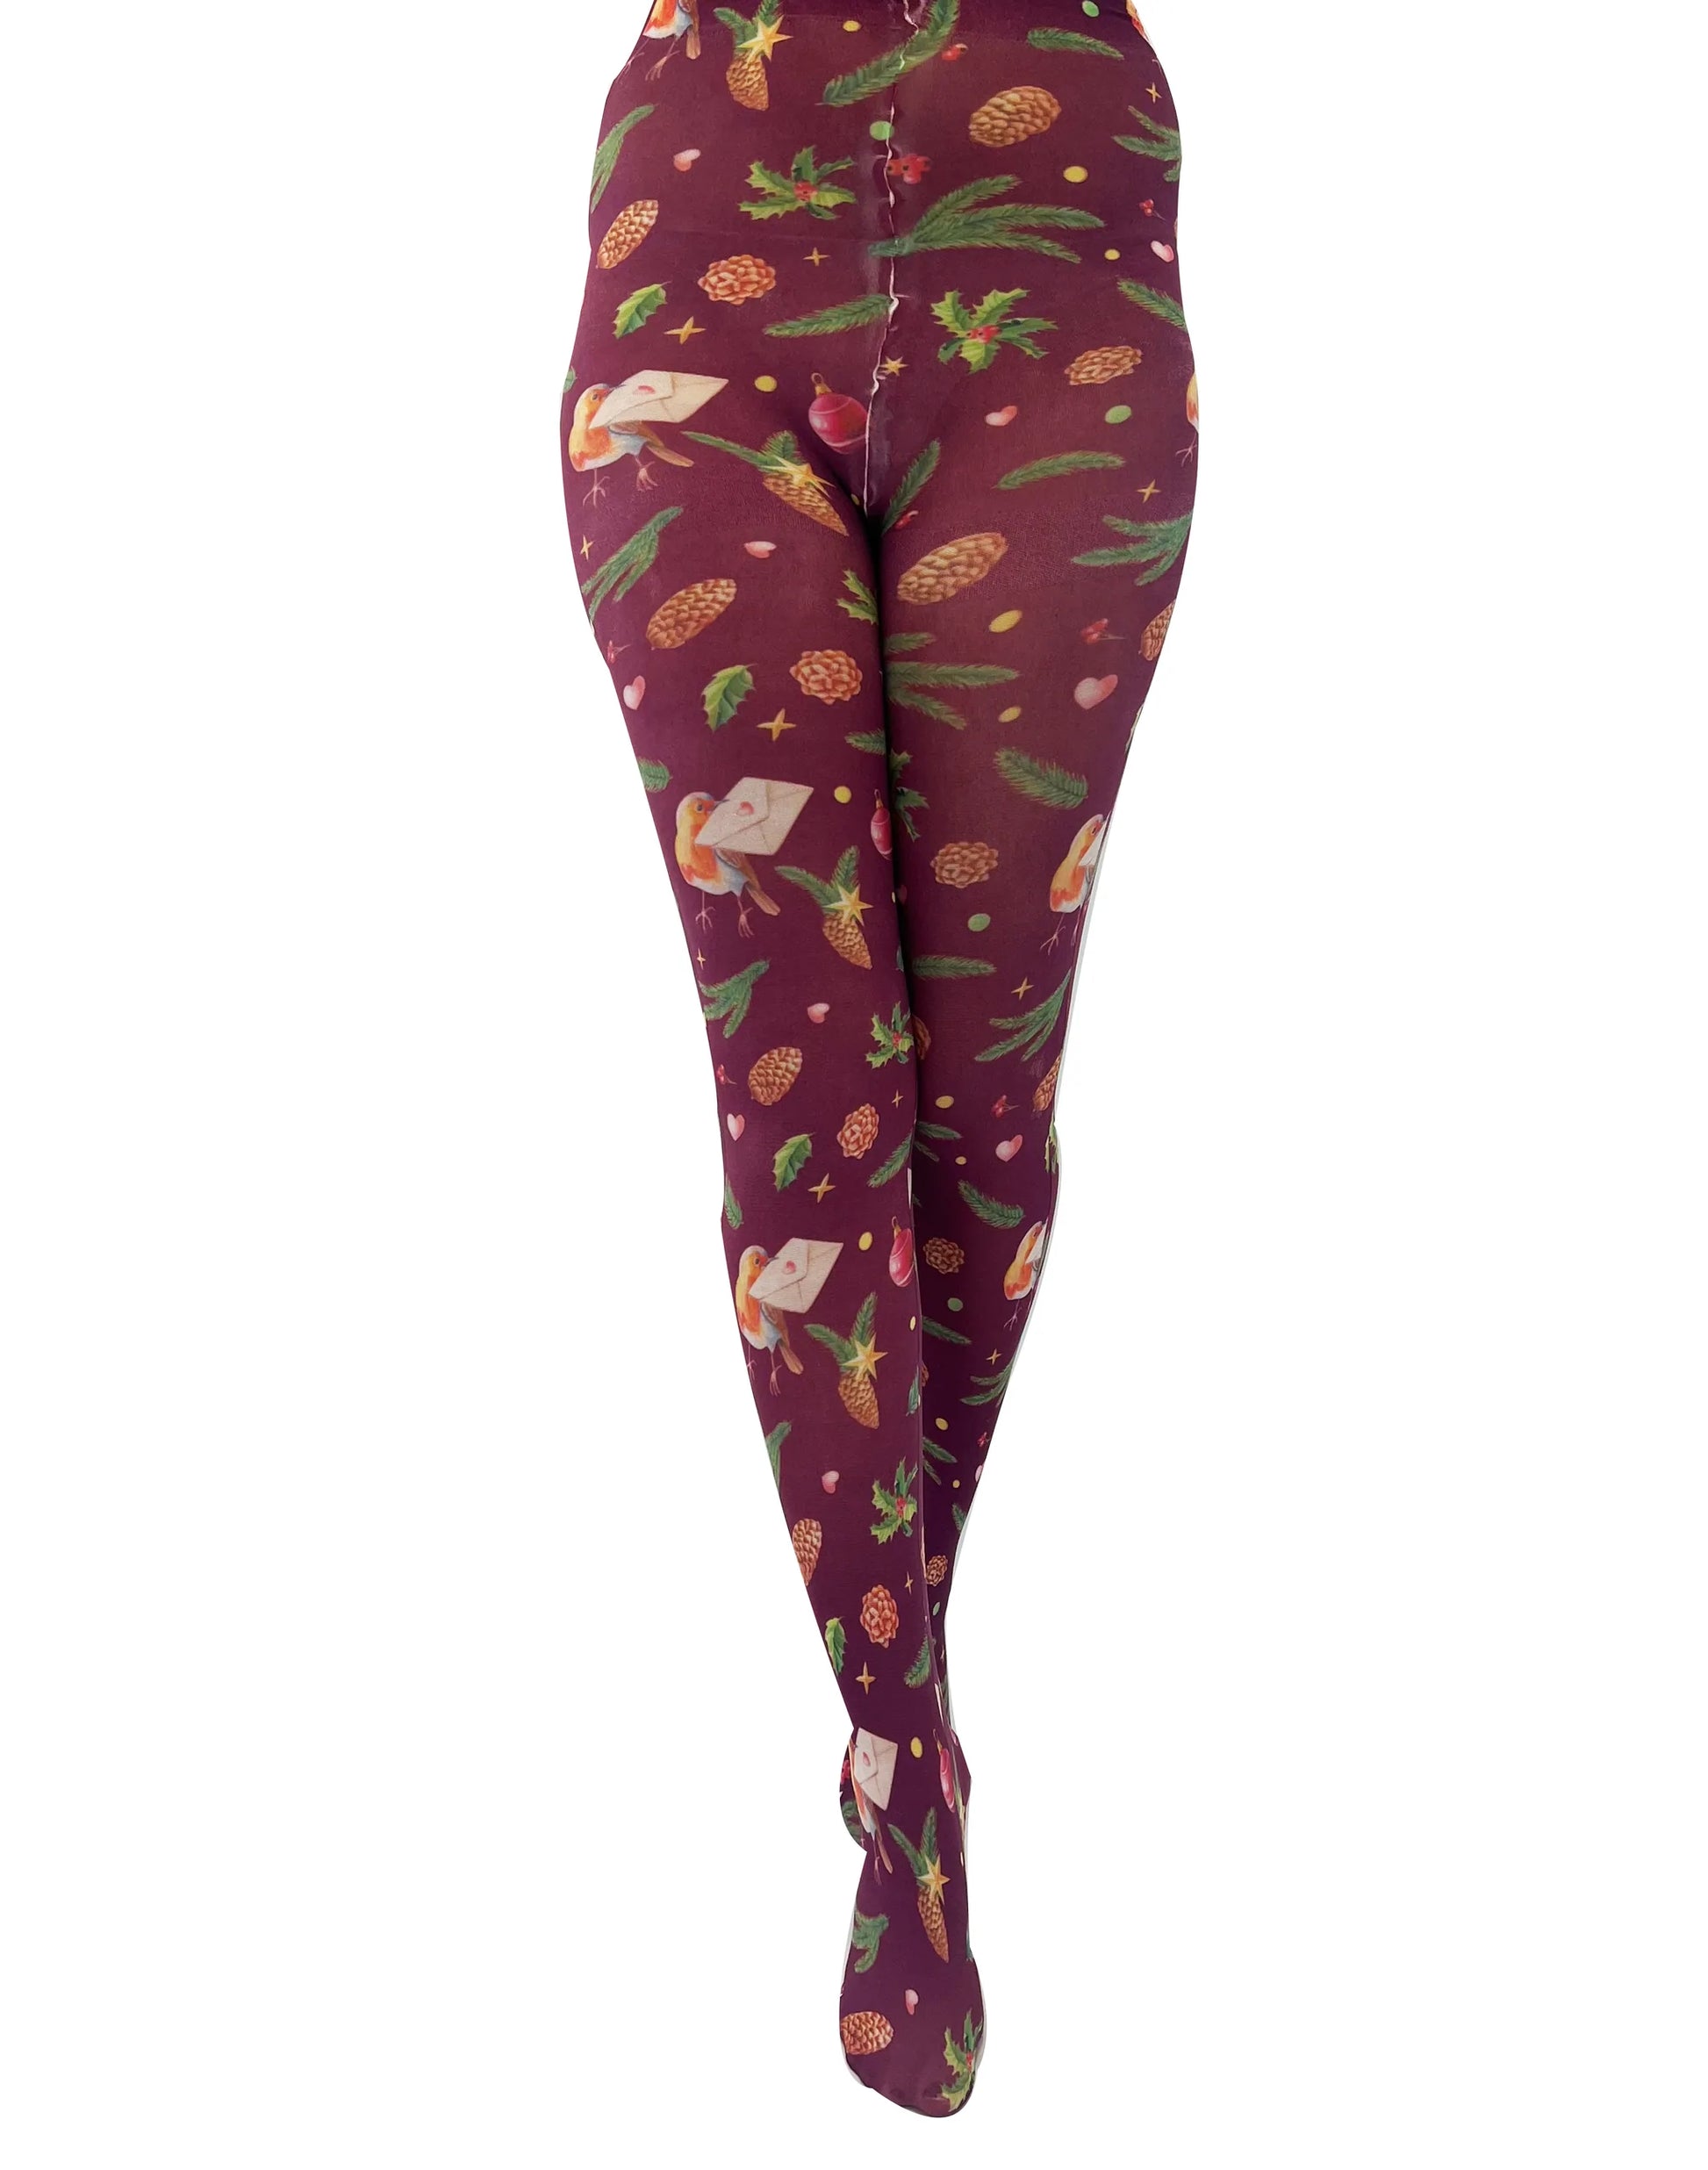 Pamela Mann Robin Printed Tights - White opaque tights with an all over Christmas themed print of Robins delivering letters, holly, pine cones, baubles, stars and hearts on a wine / burgundy background.